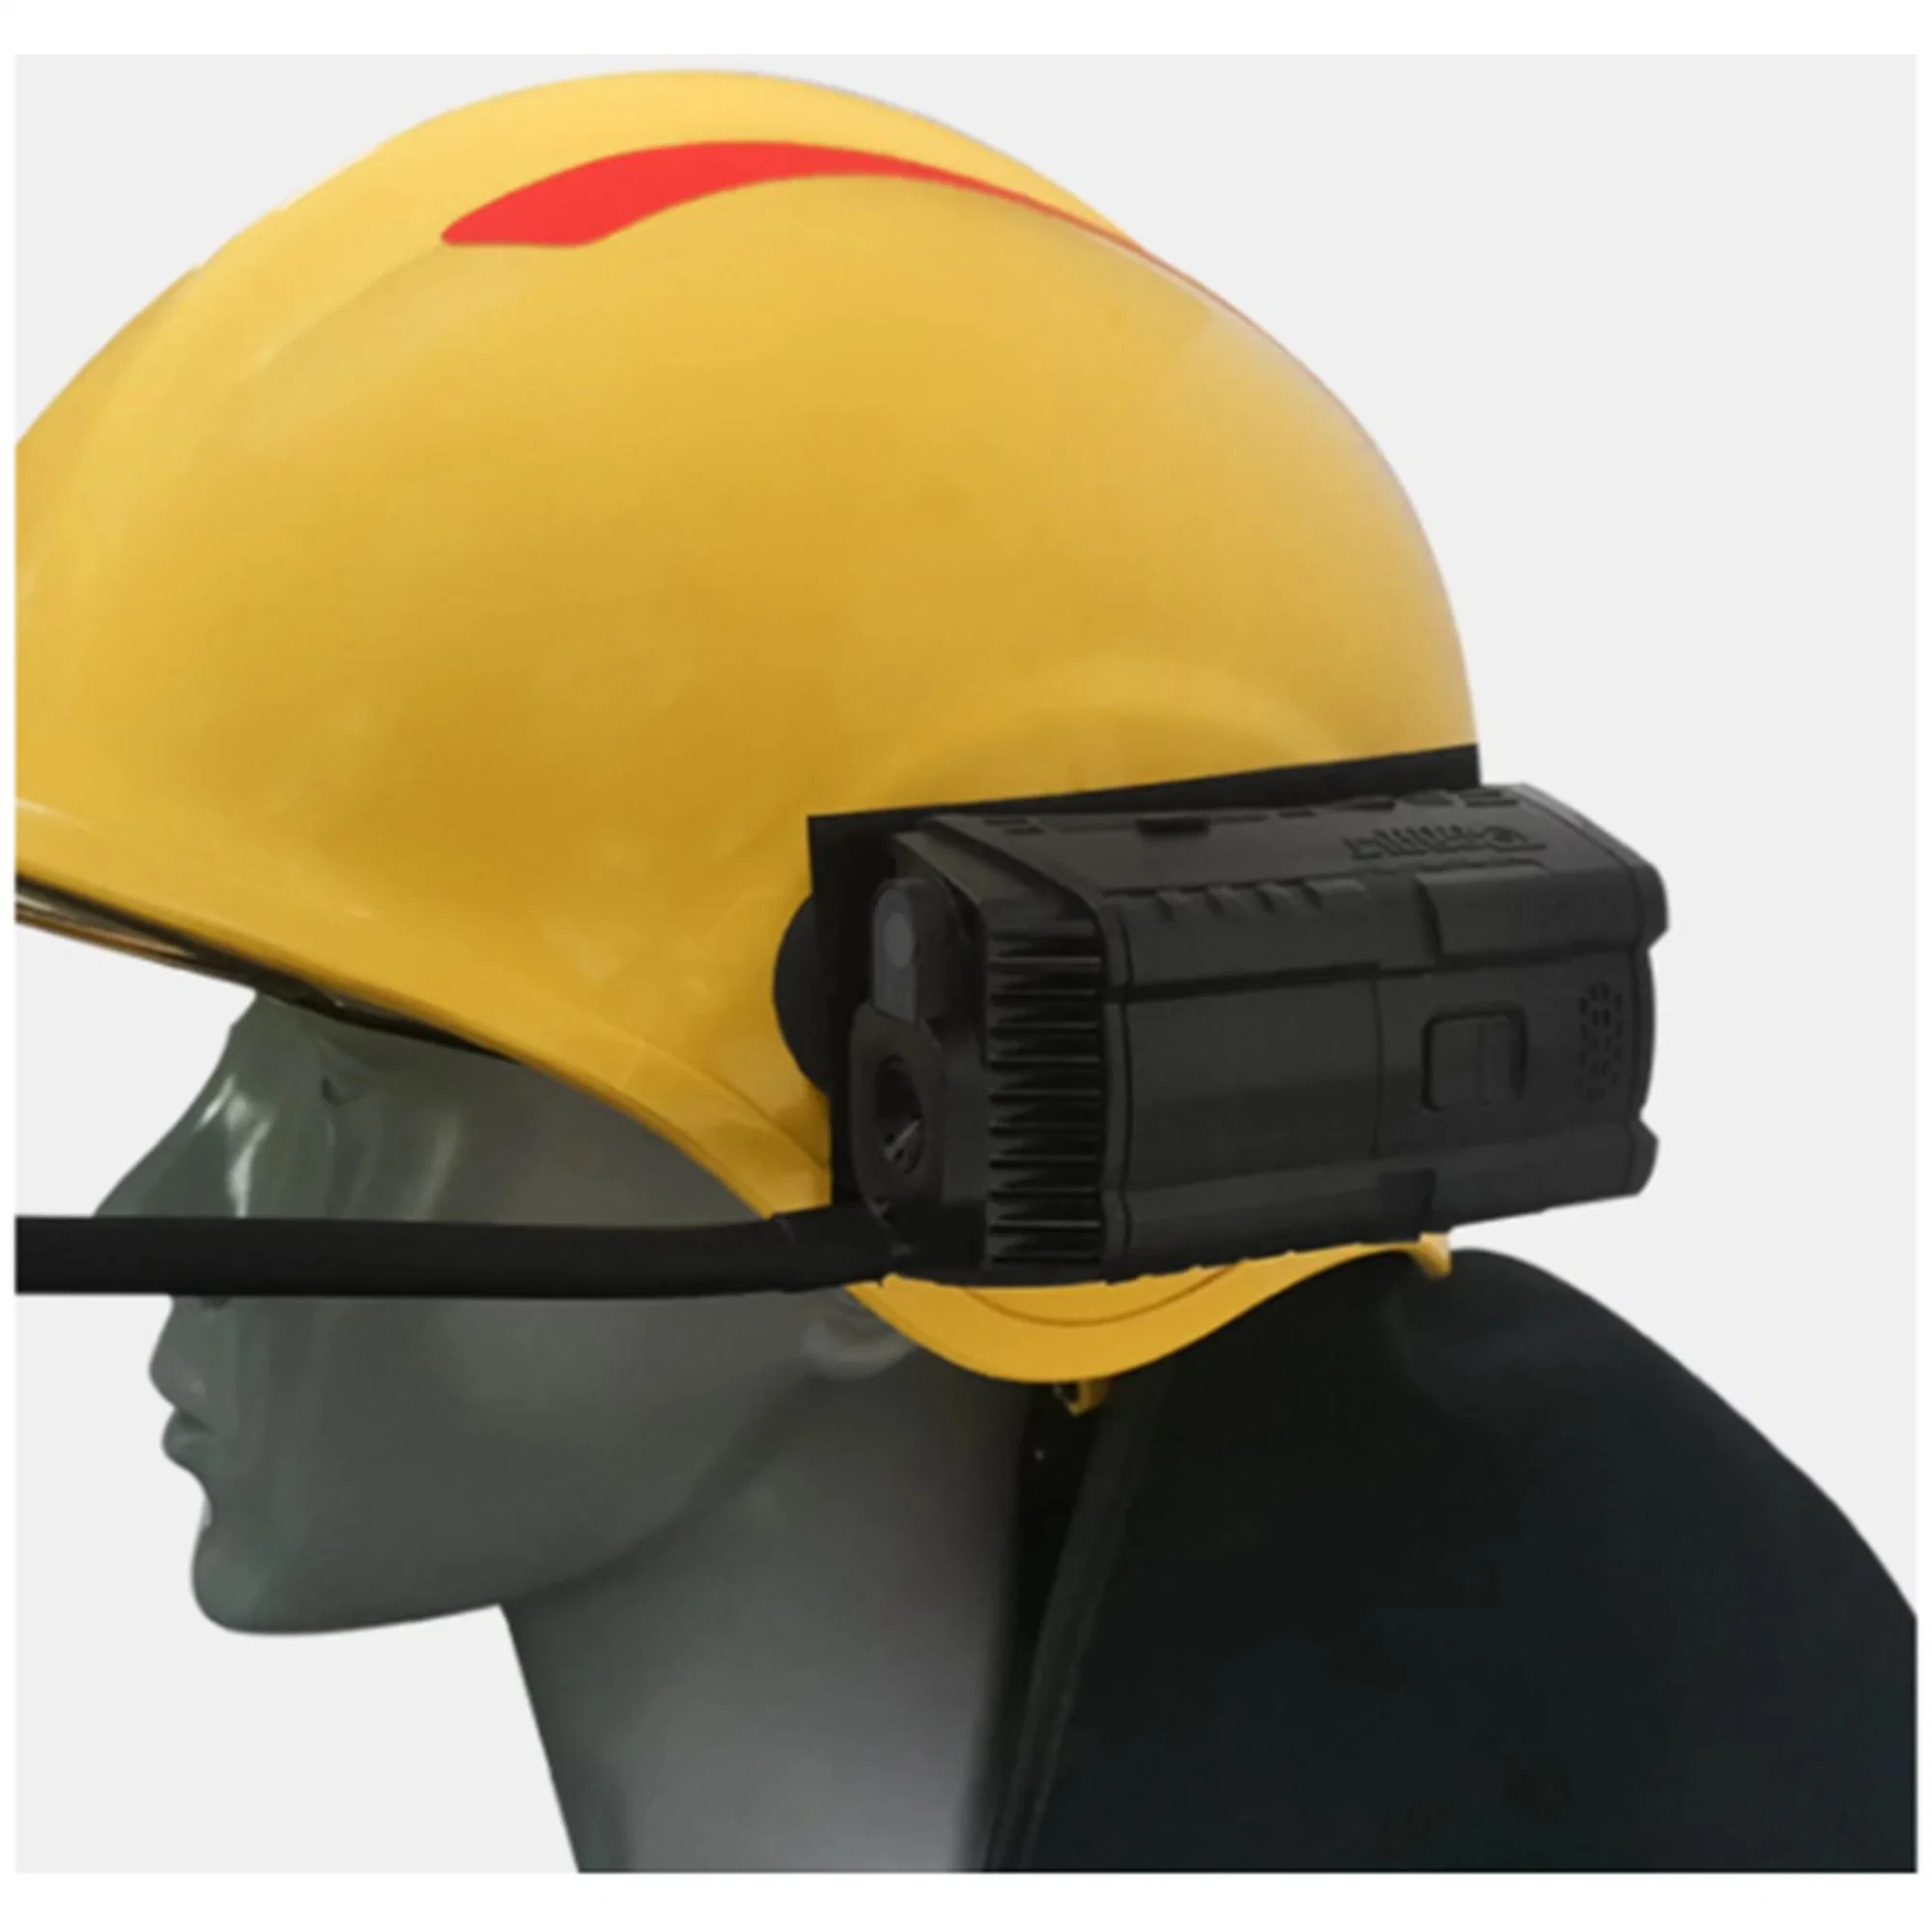 Factory Price Firefighter Safety and Protection Smart Helmet Thermal Imaging Helmet with Camera Waterproof Helmet